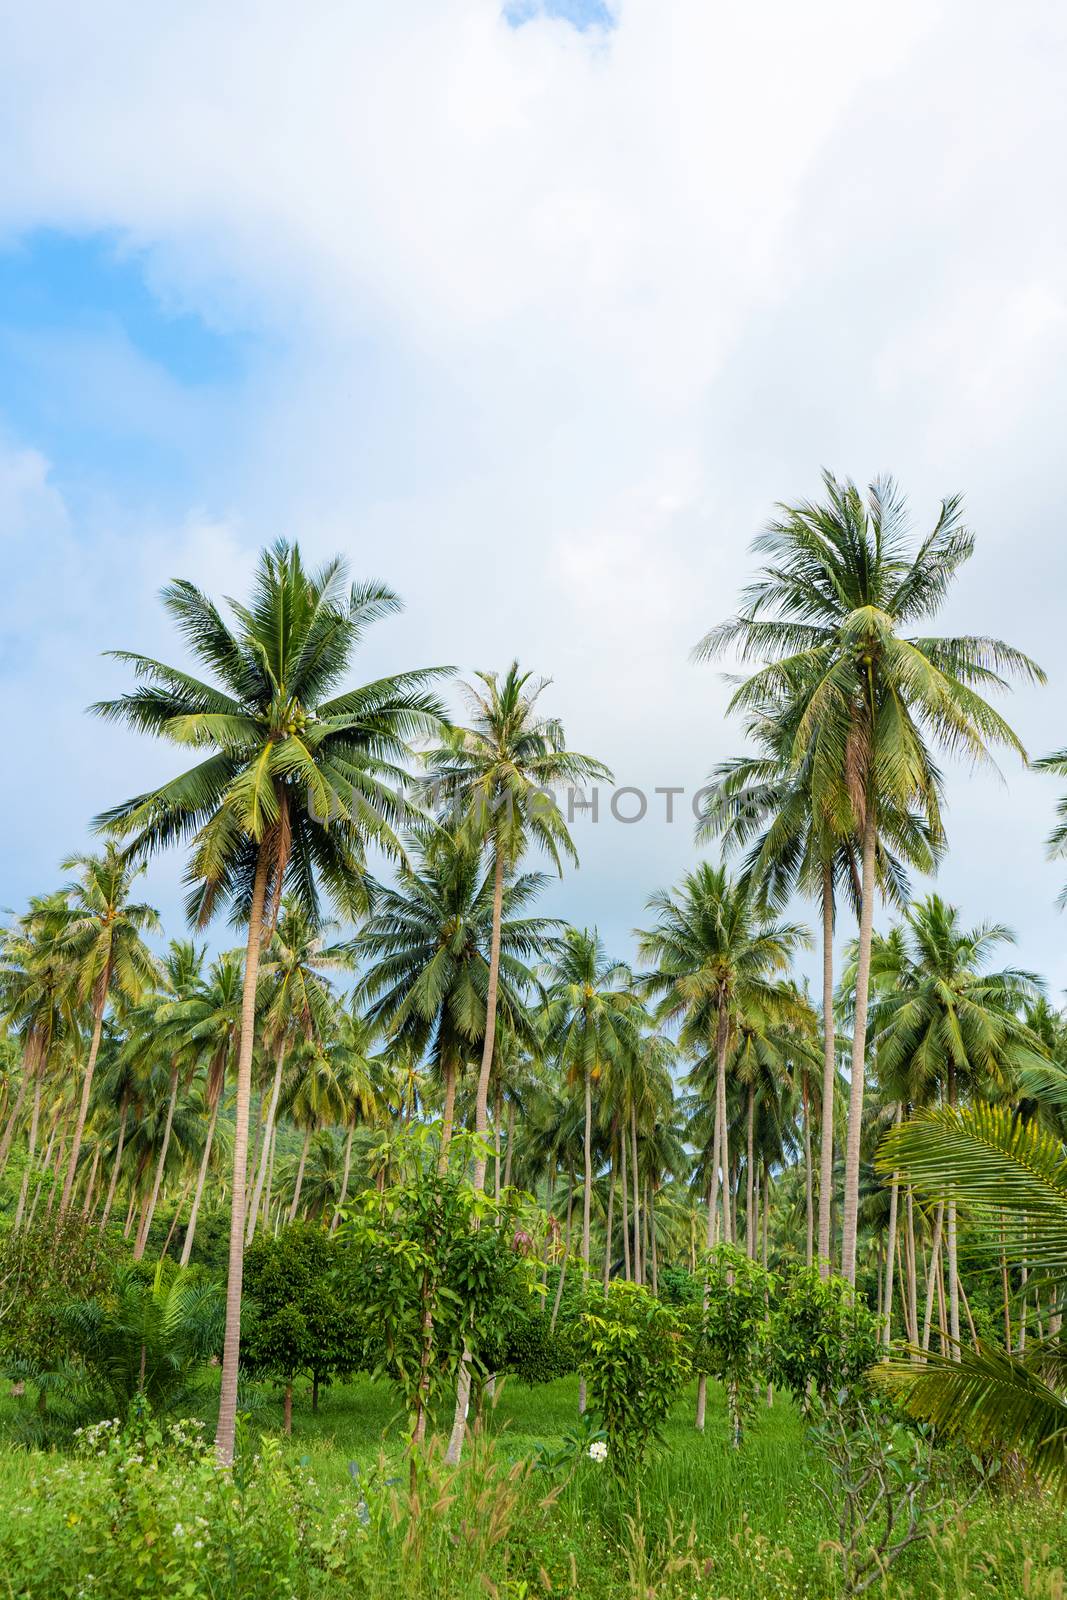 palm grove. Palm trees in the tropical jungle. Symbol of the tropics and warmth.